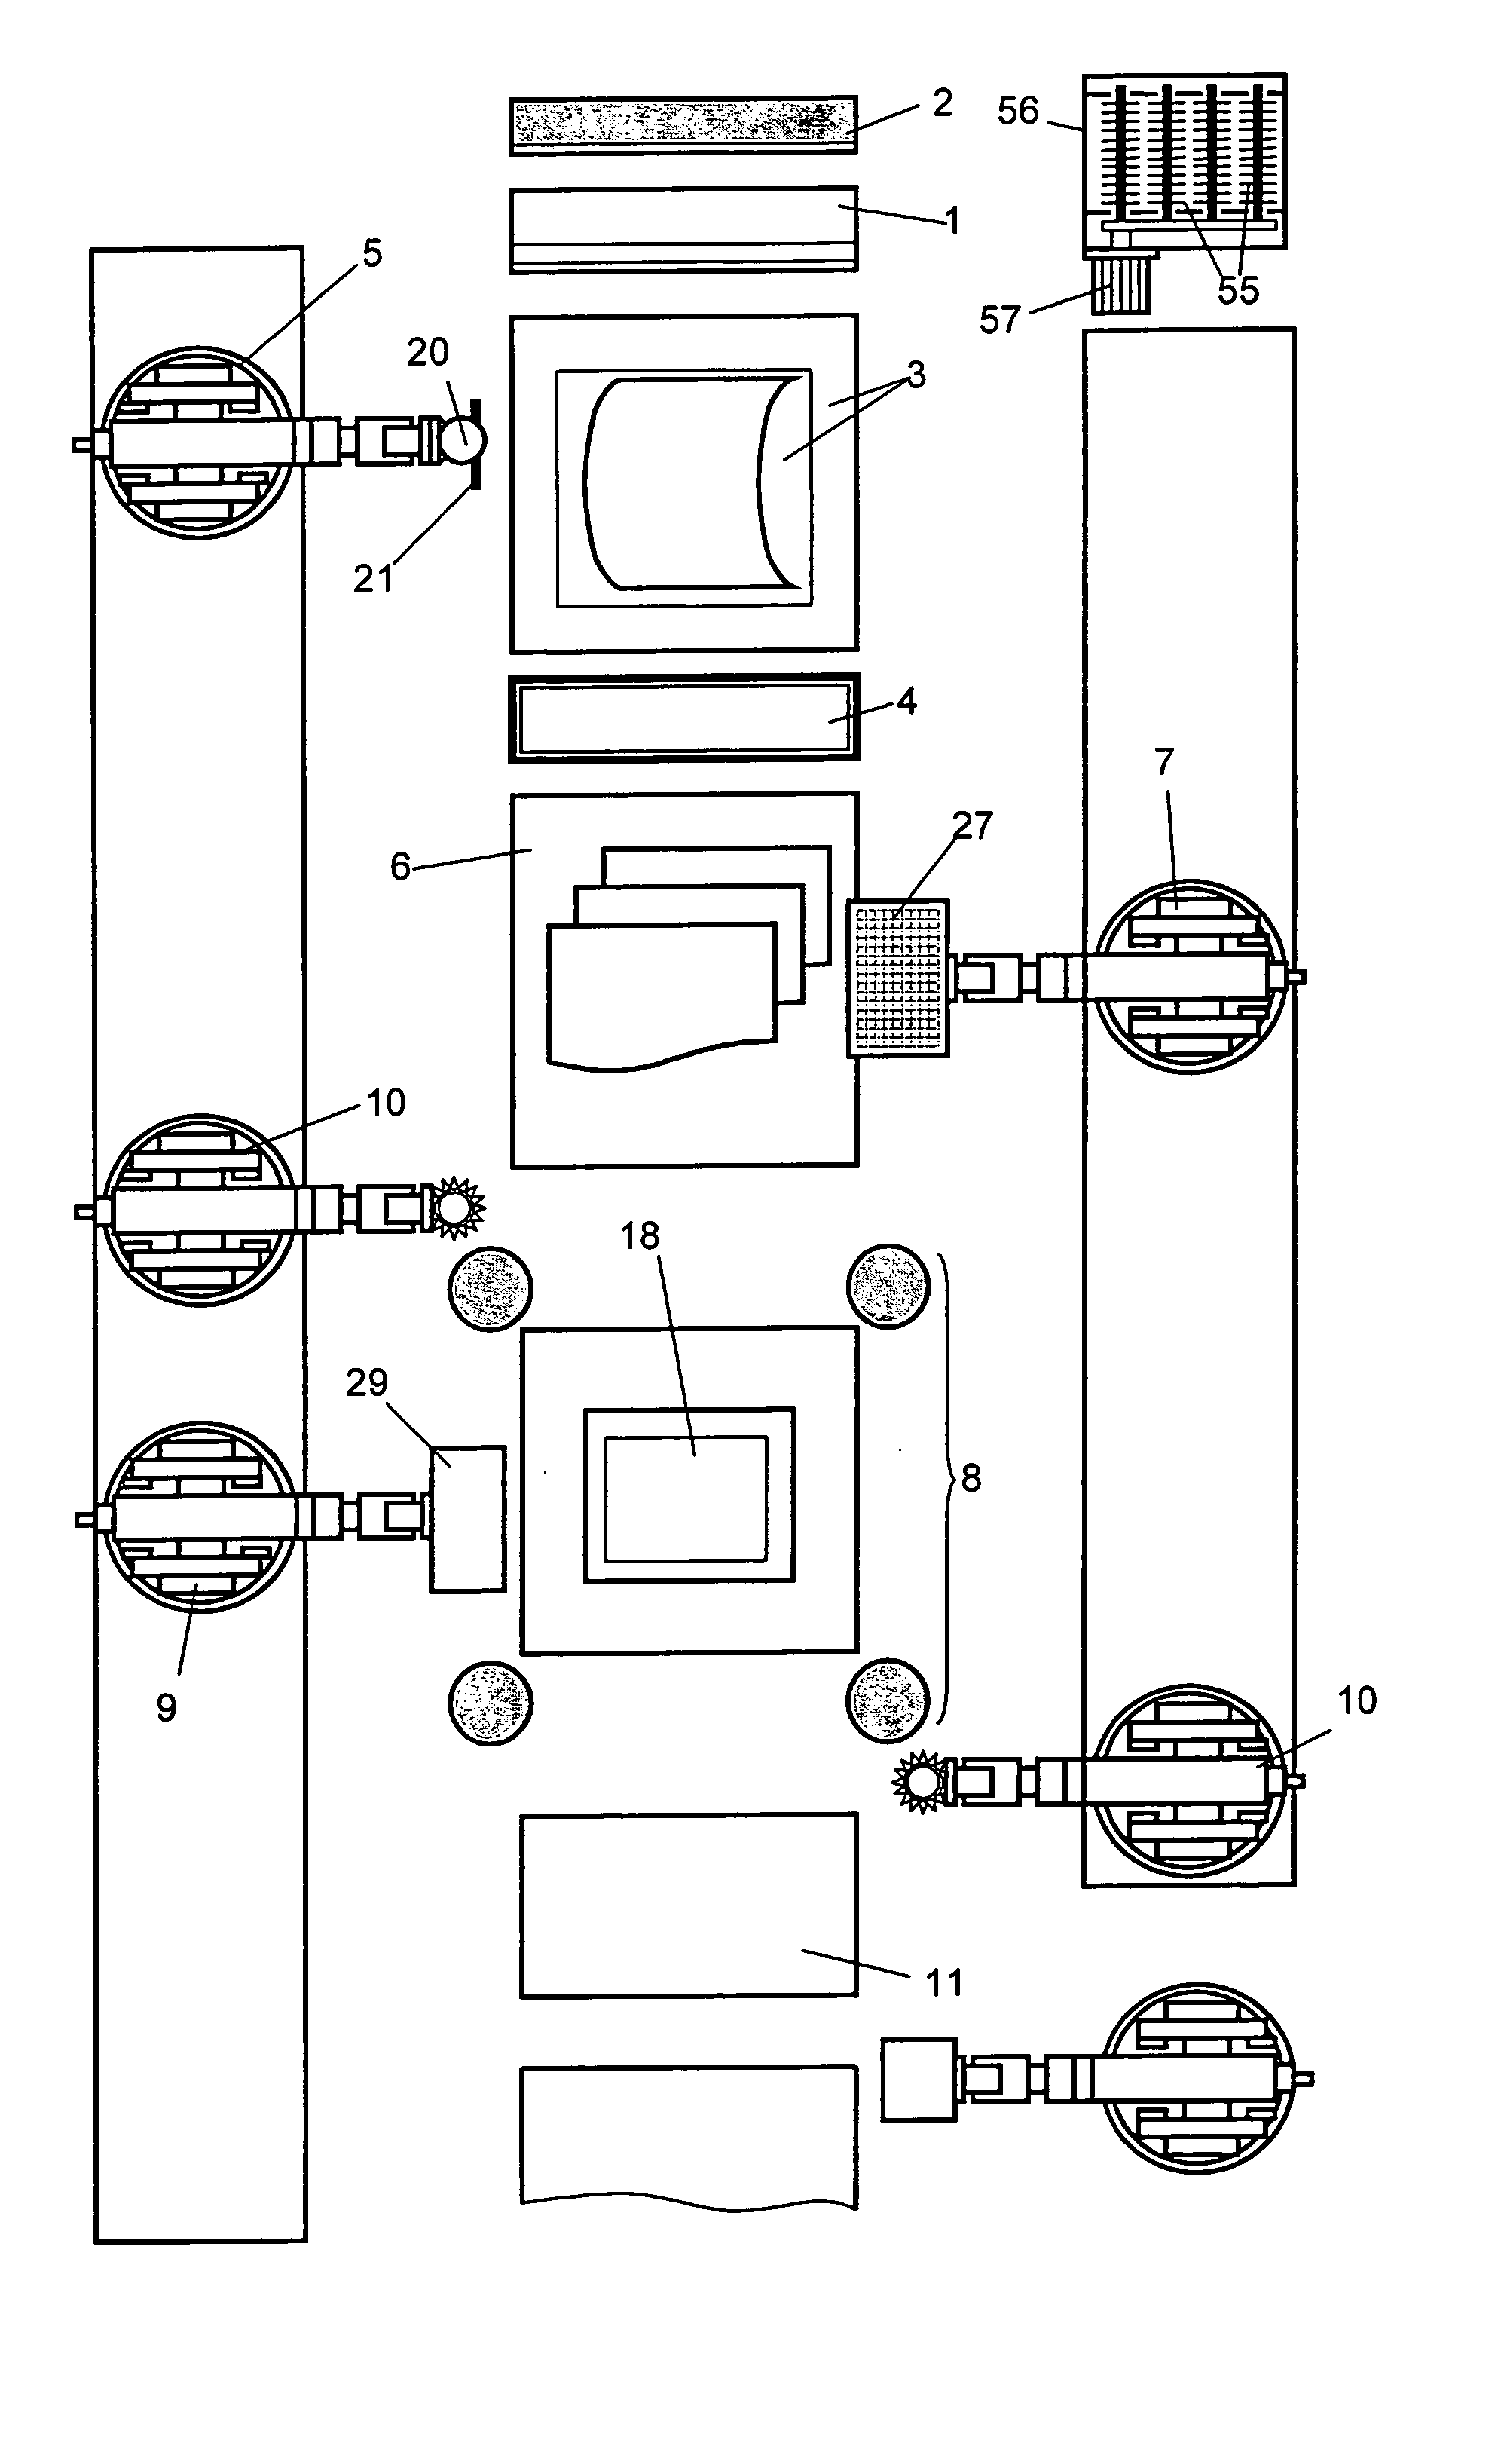 Method and device for the automated handling of resin-impregnated mats during the production of smc parts